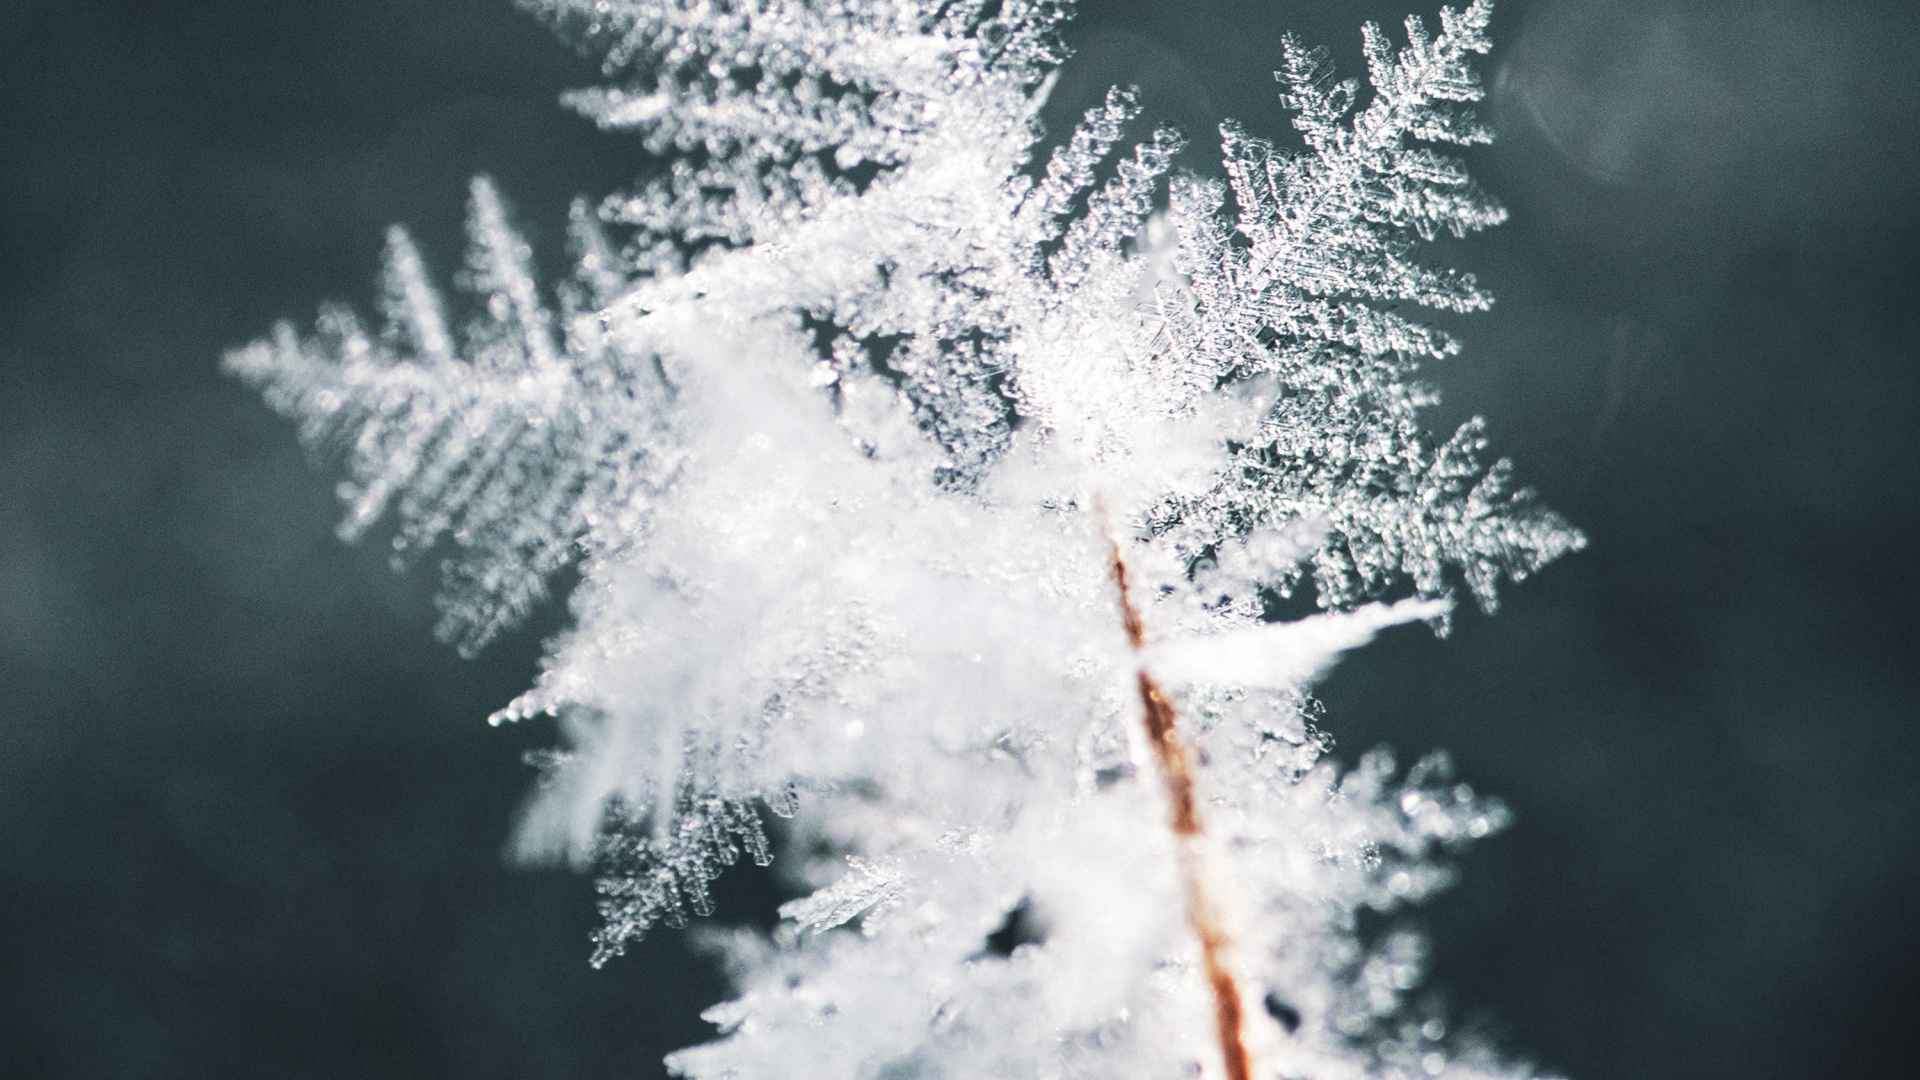 Winter, Snow, Frost, Freezing, Branch. Wallpaper in 1920x1080 Resolution